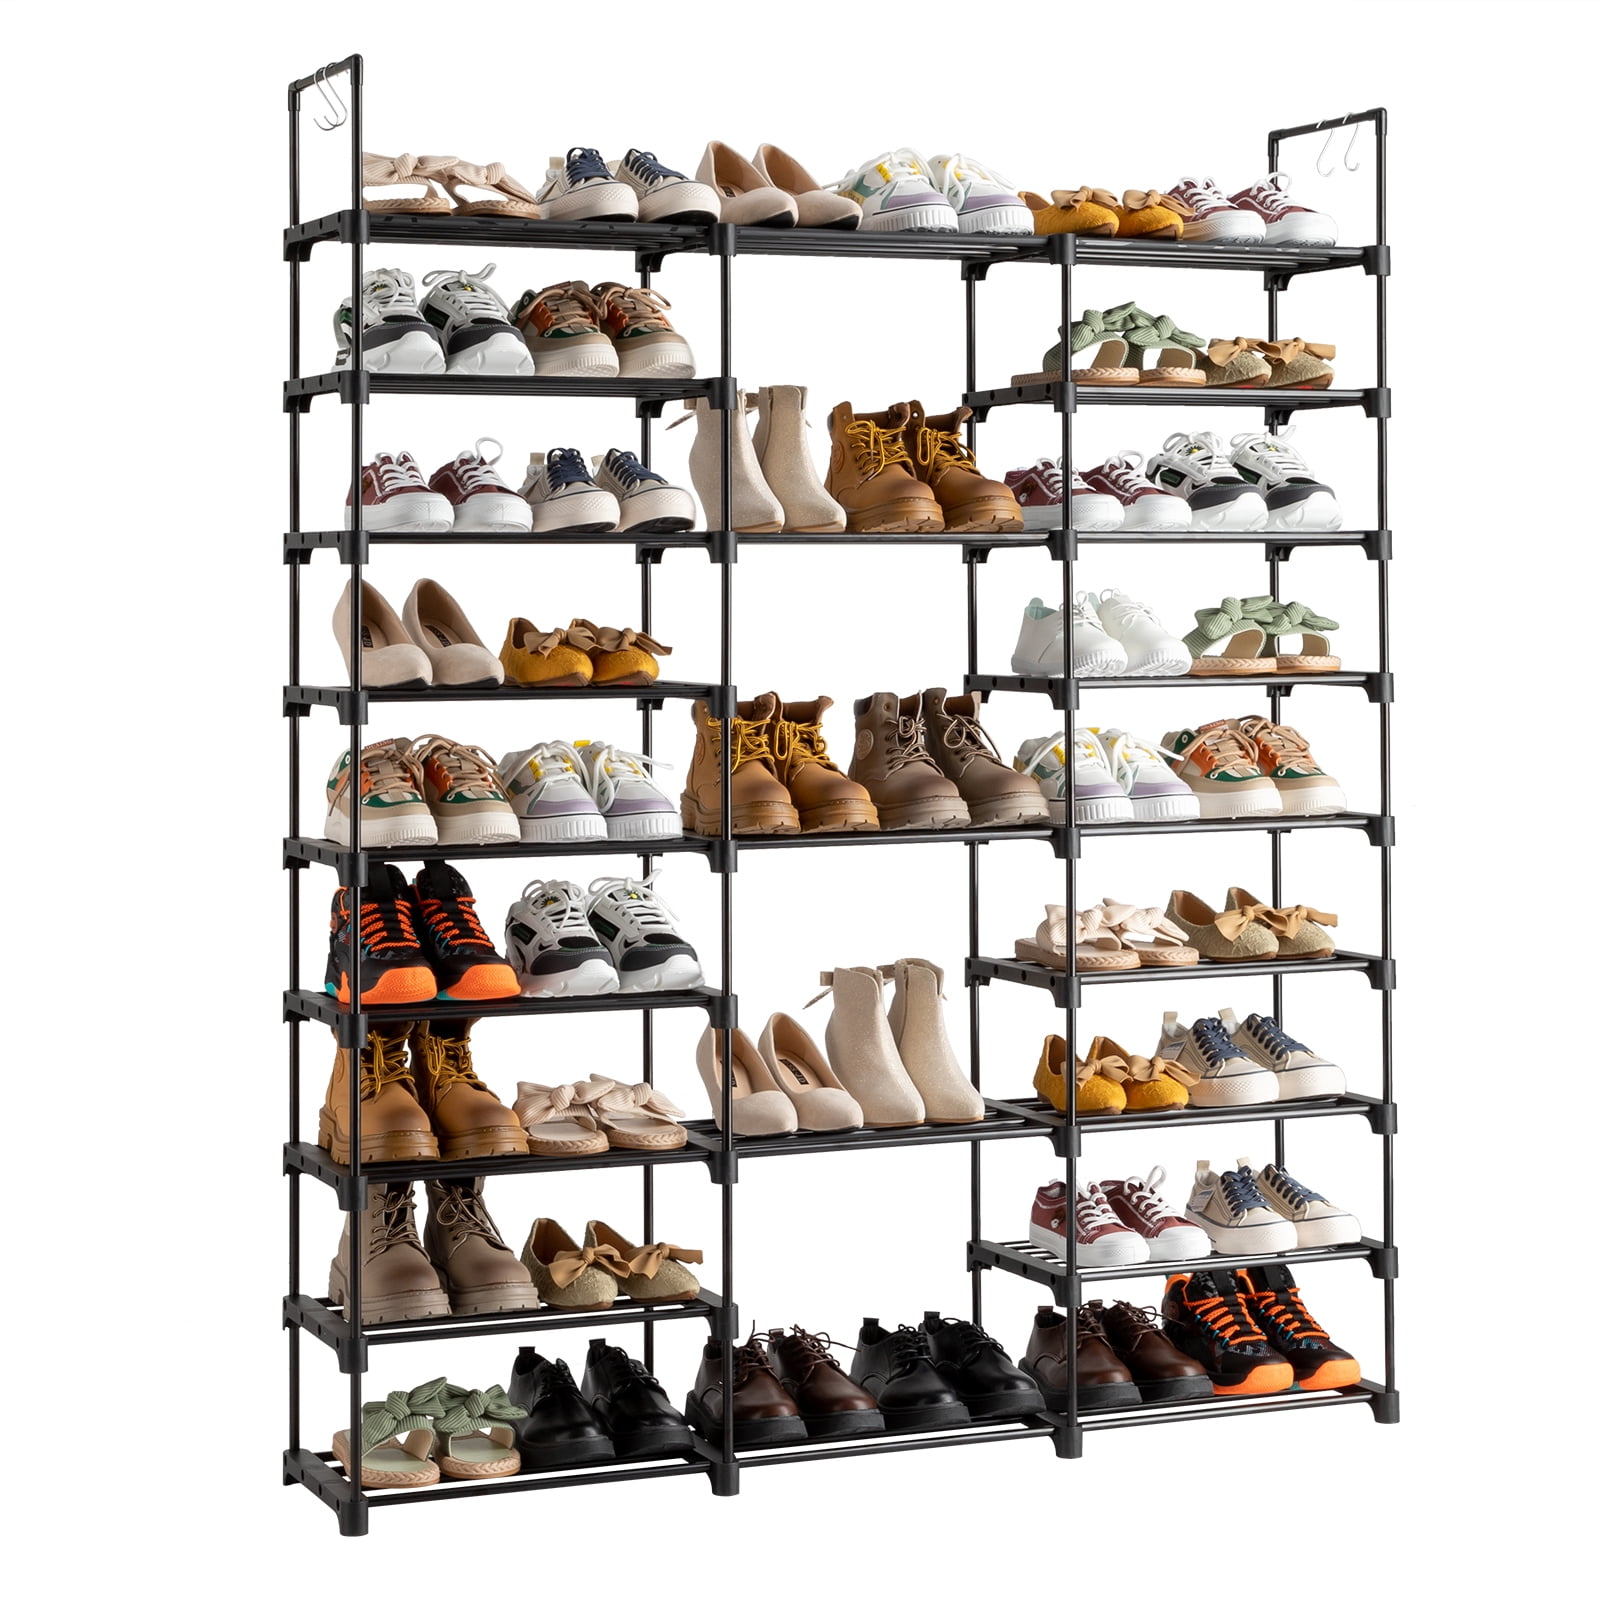  SUNTAGE Free-Standing Shoe Rack Organizer, Garage Shoe Storage  Organizer with Side Hooks & Pockets, Metal Shoe Rack for Garage, Entryway,  Holds 32 Pairs Shoes & Boots, 2 Columns, 9 Tiers 